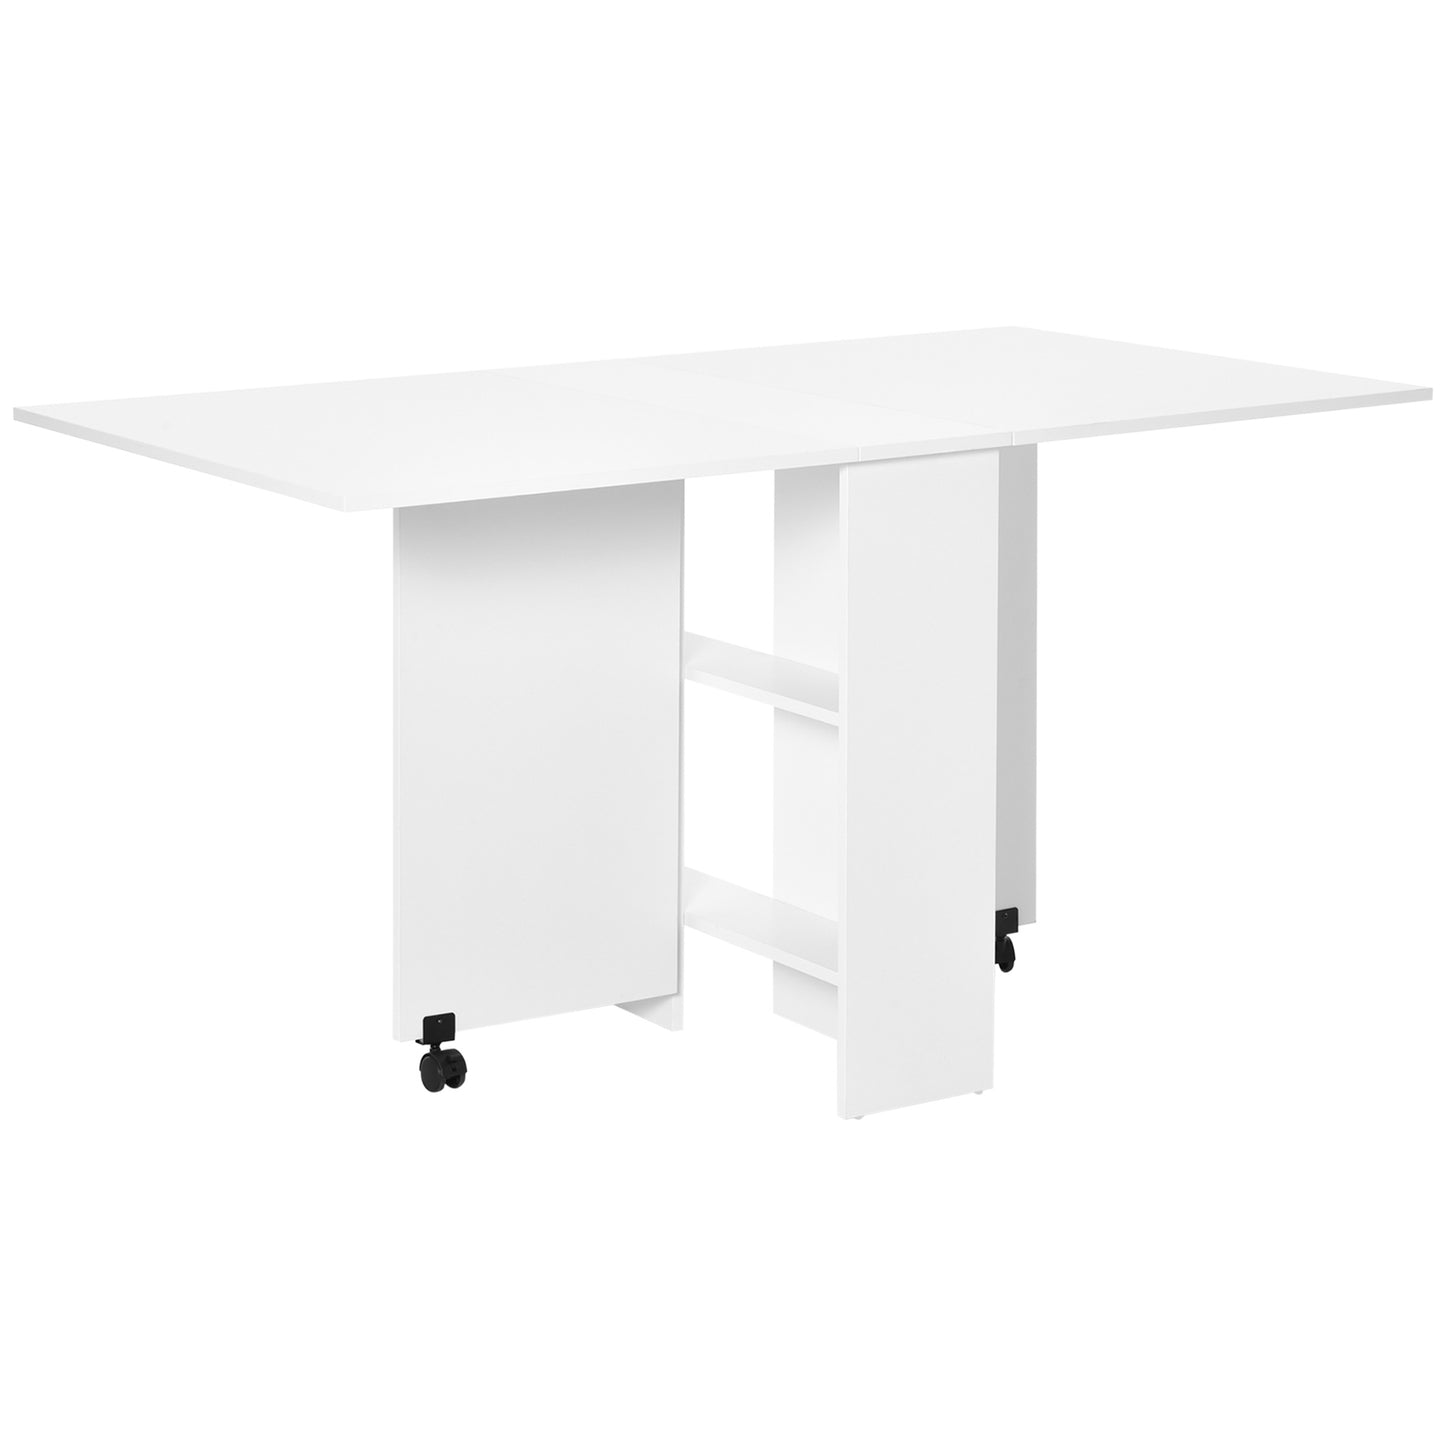 Mobile Drop Leaf Dining Kitchen Table, Folding Desk For Small Spaces With 2 Wheels & 2 Storage Shelves, White, HOMCOM, 1